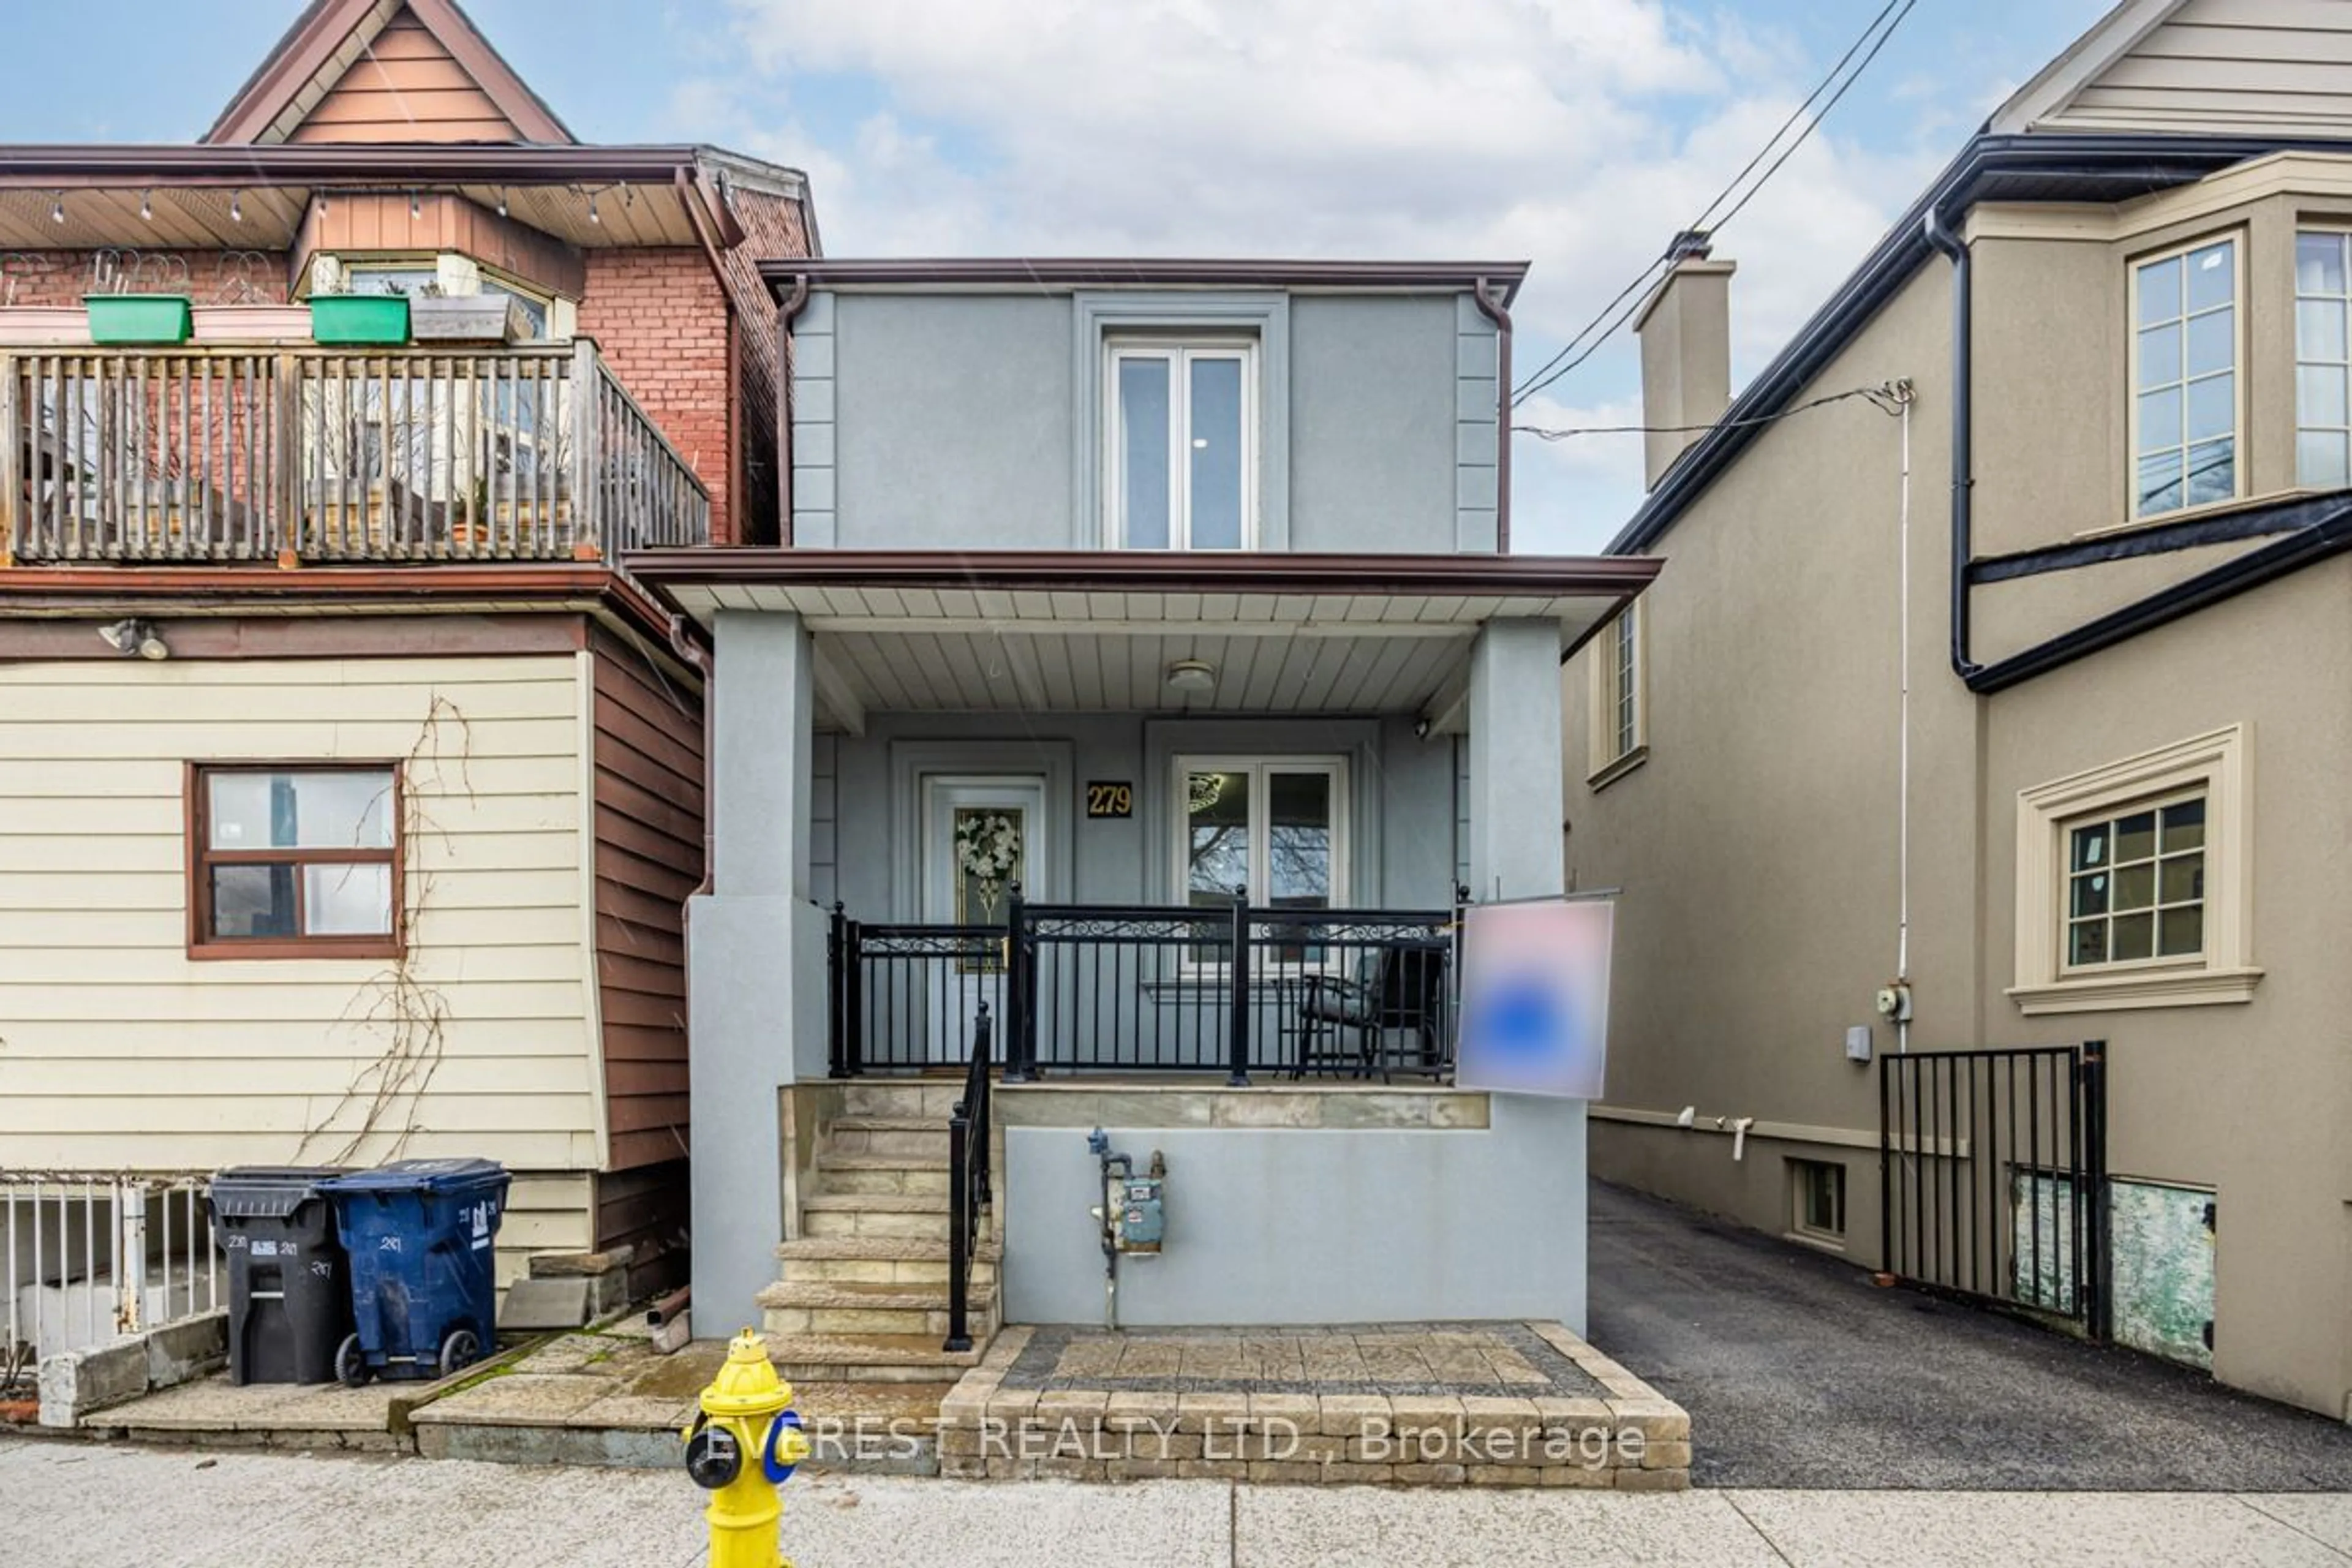 Frontside or backside of a home for 279 Old Weston Rd, Toronto Ontario M6N 3A7